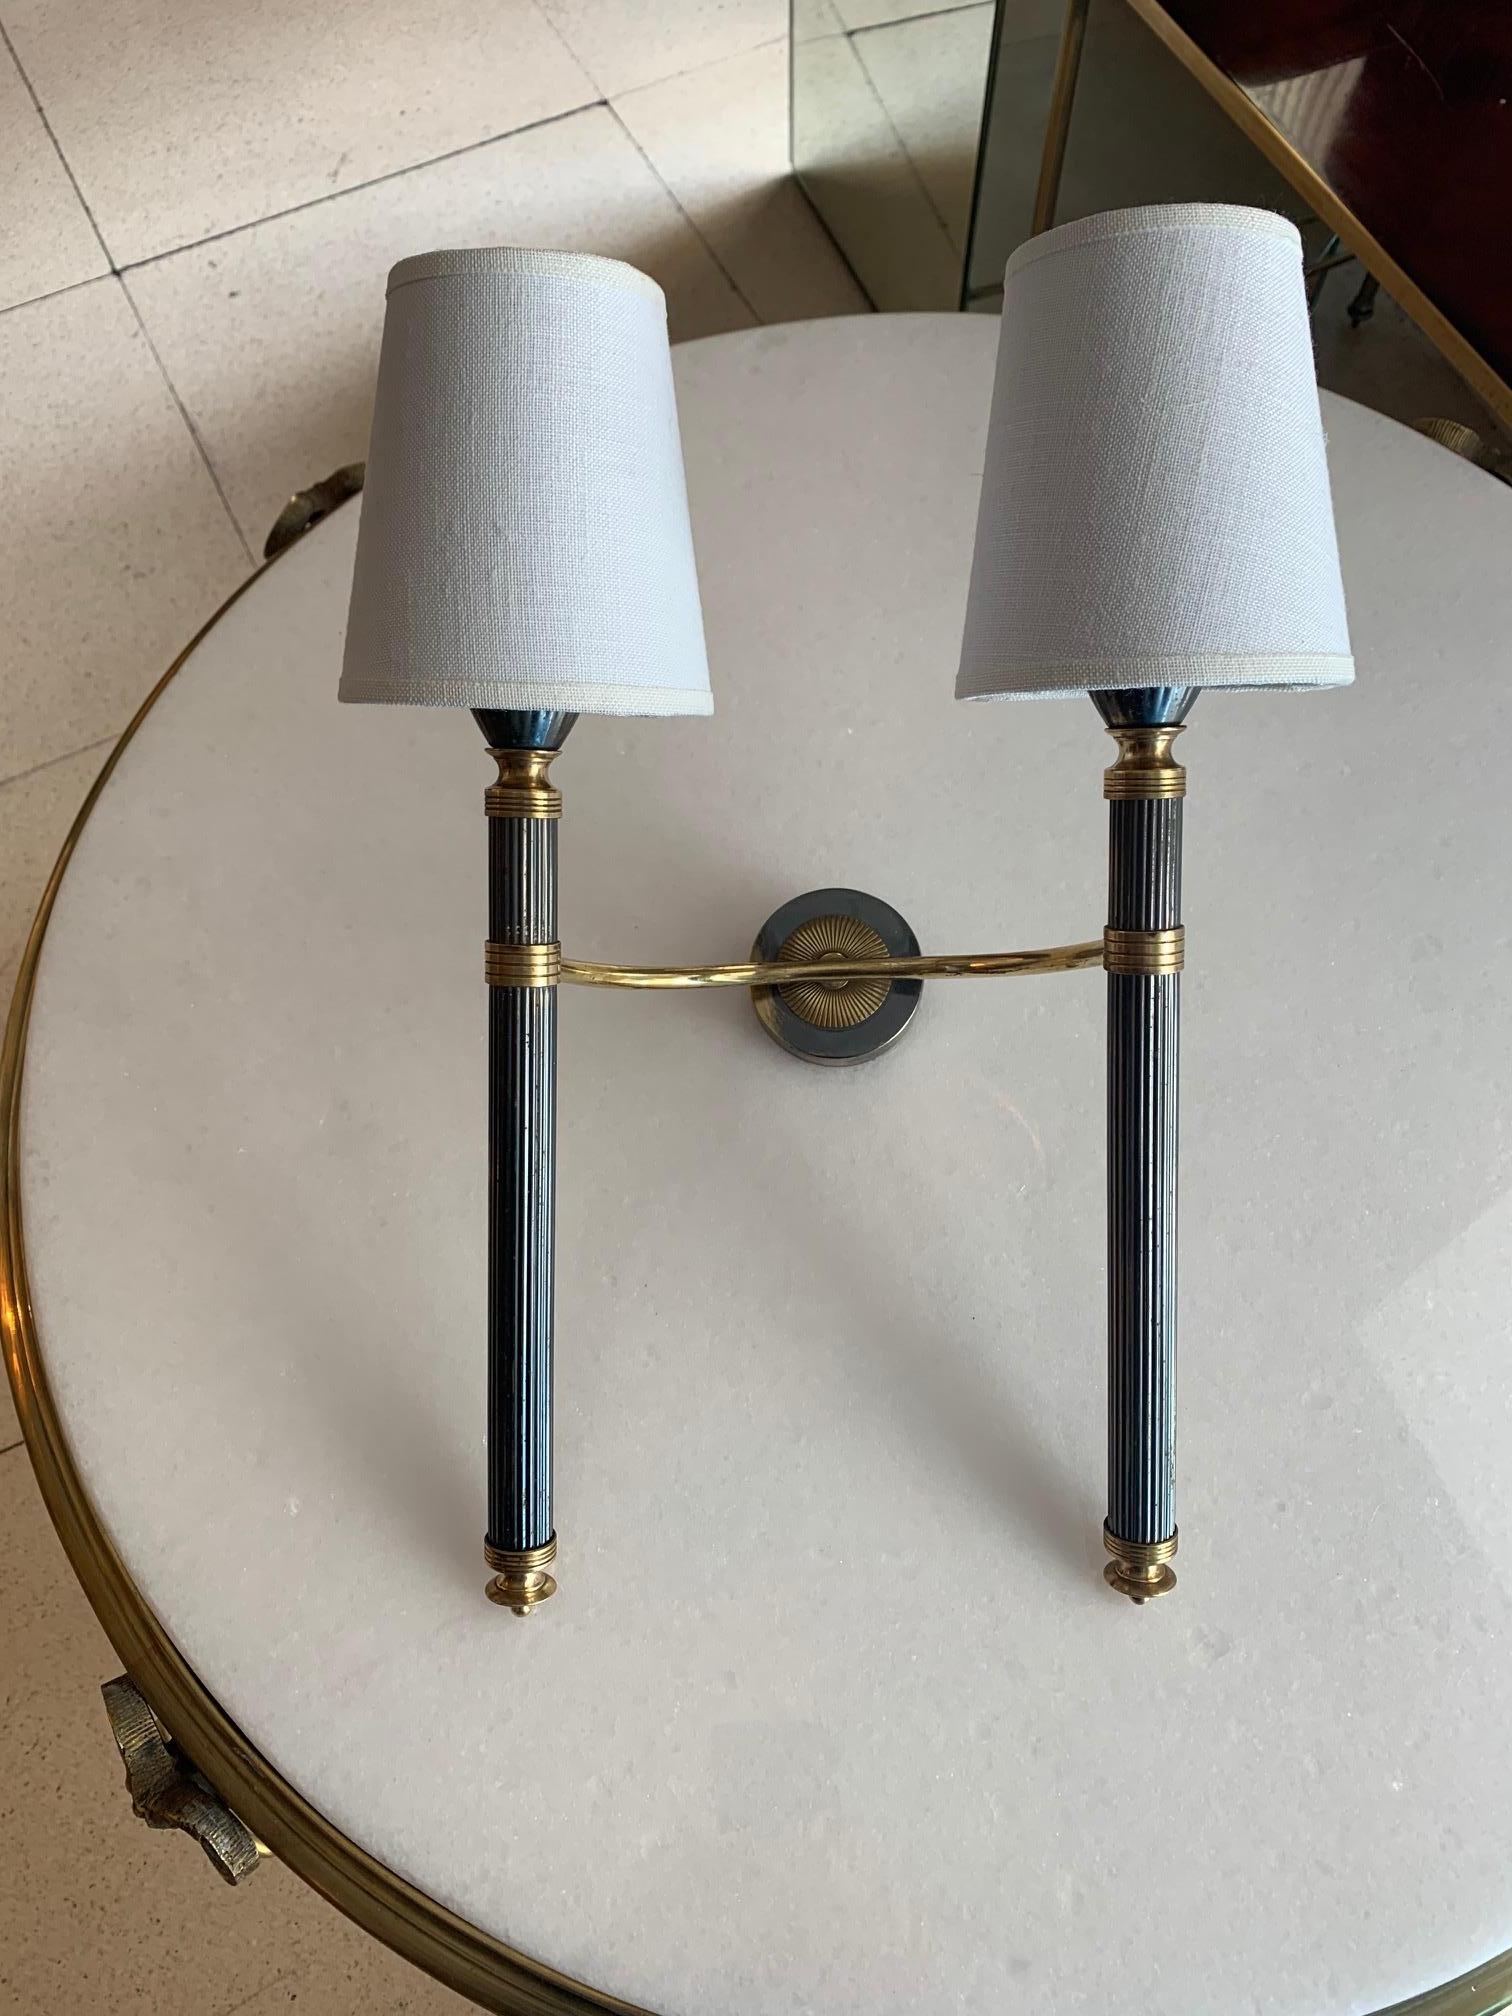 Pair of Midcentury Patinated Brass Doble Wall Sconces by Lunel 1